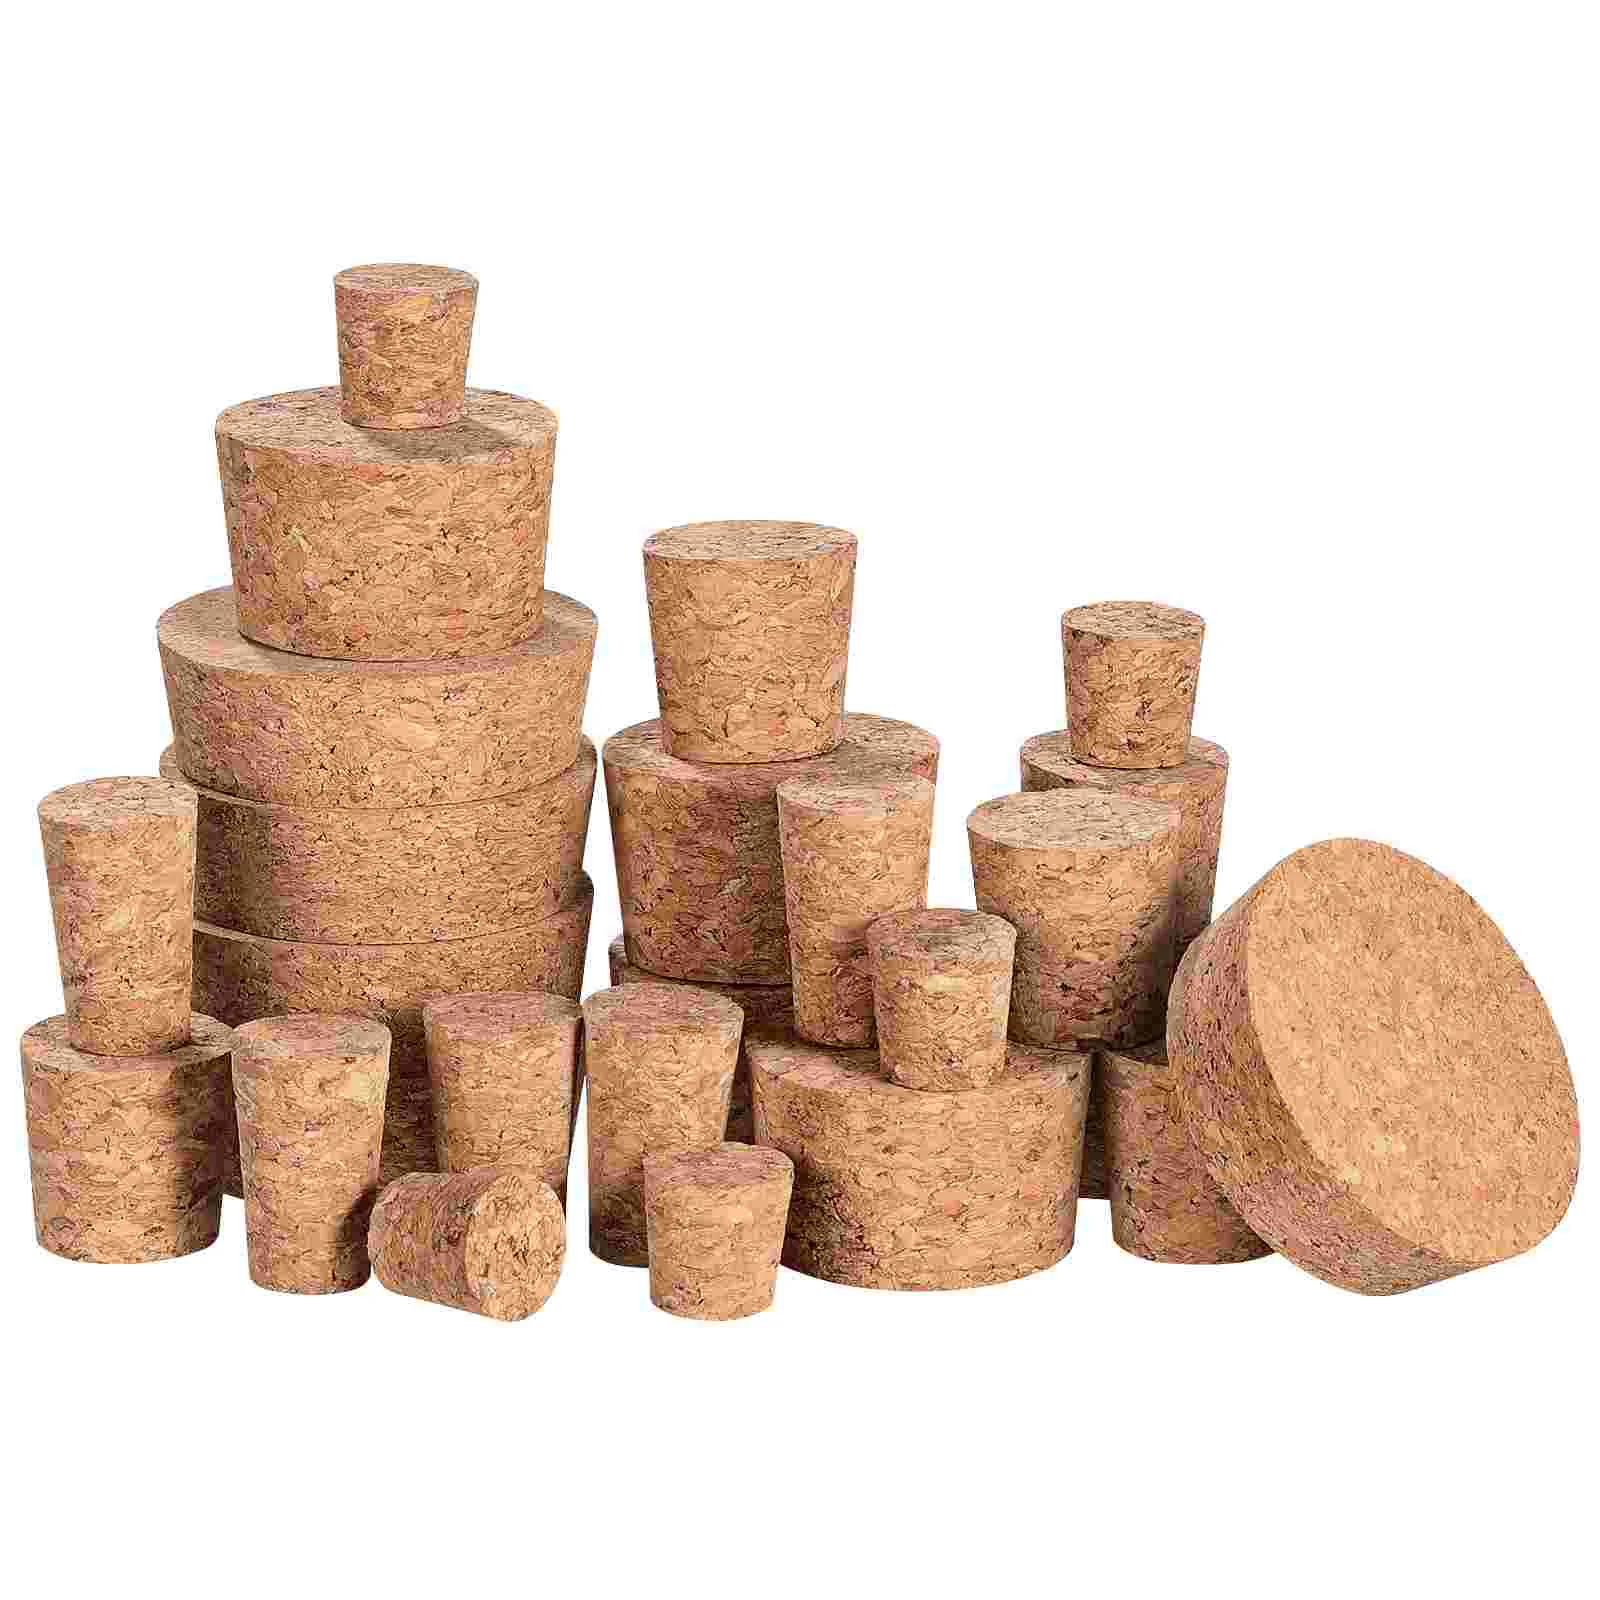 

Mini Bottles Cork Replacement Corks Beer Tapered Leakproof Stoppers Wooden Leak-proof Plugs